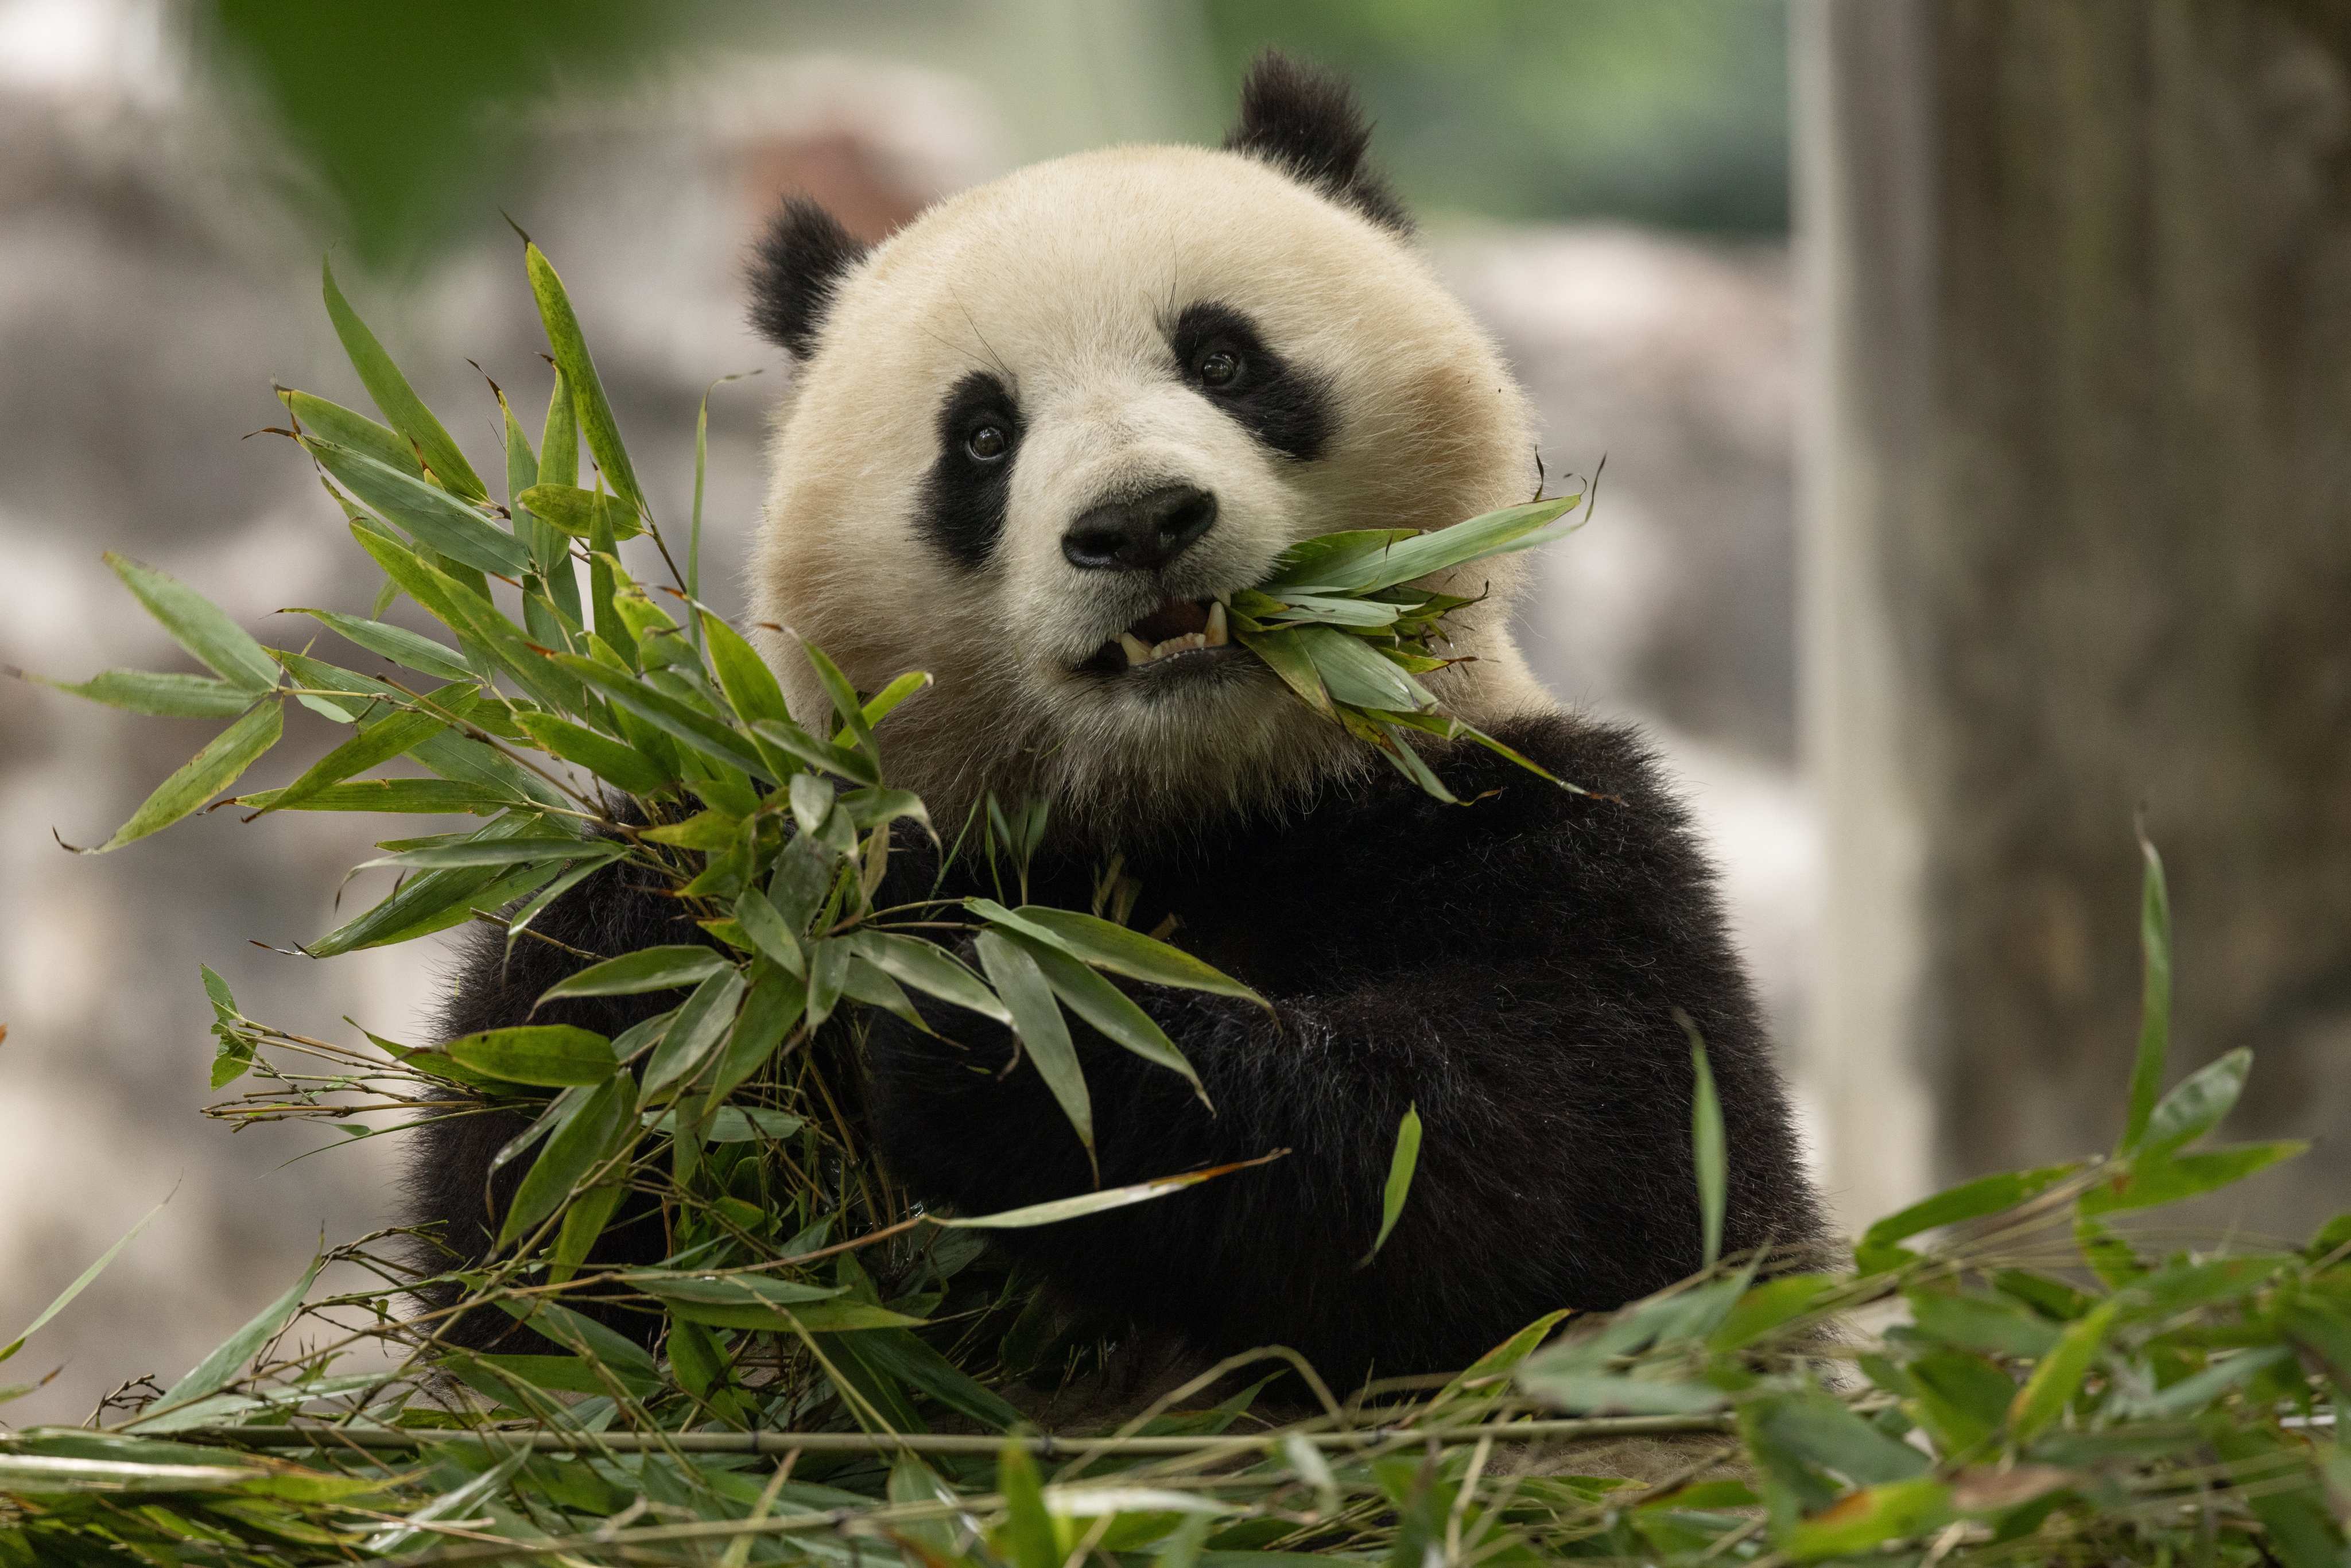 Qing Bao, a Washington-bound female giant panda, eats bamboo in her habitat in Sichuan province in China on May 17. Photo: Smithsonian’s National Zoo and Conservation Biology Institute